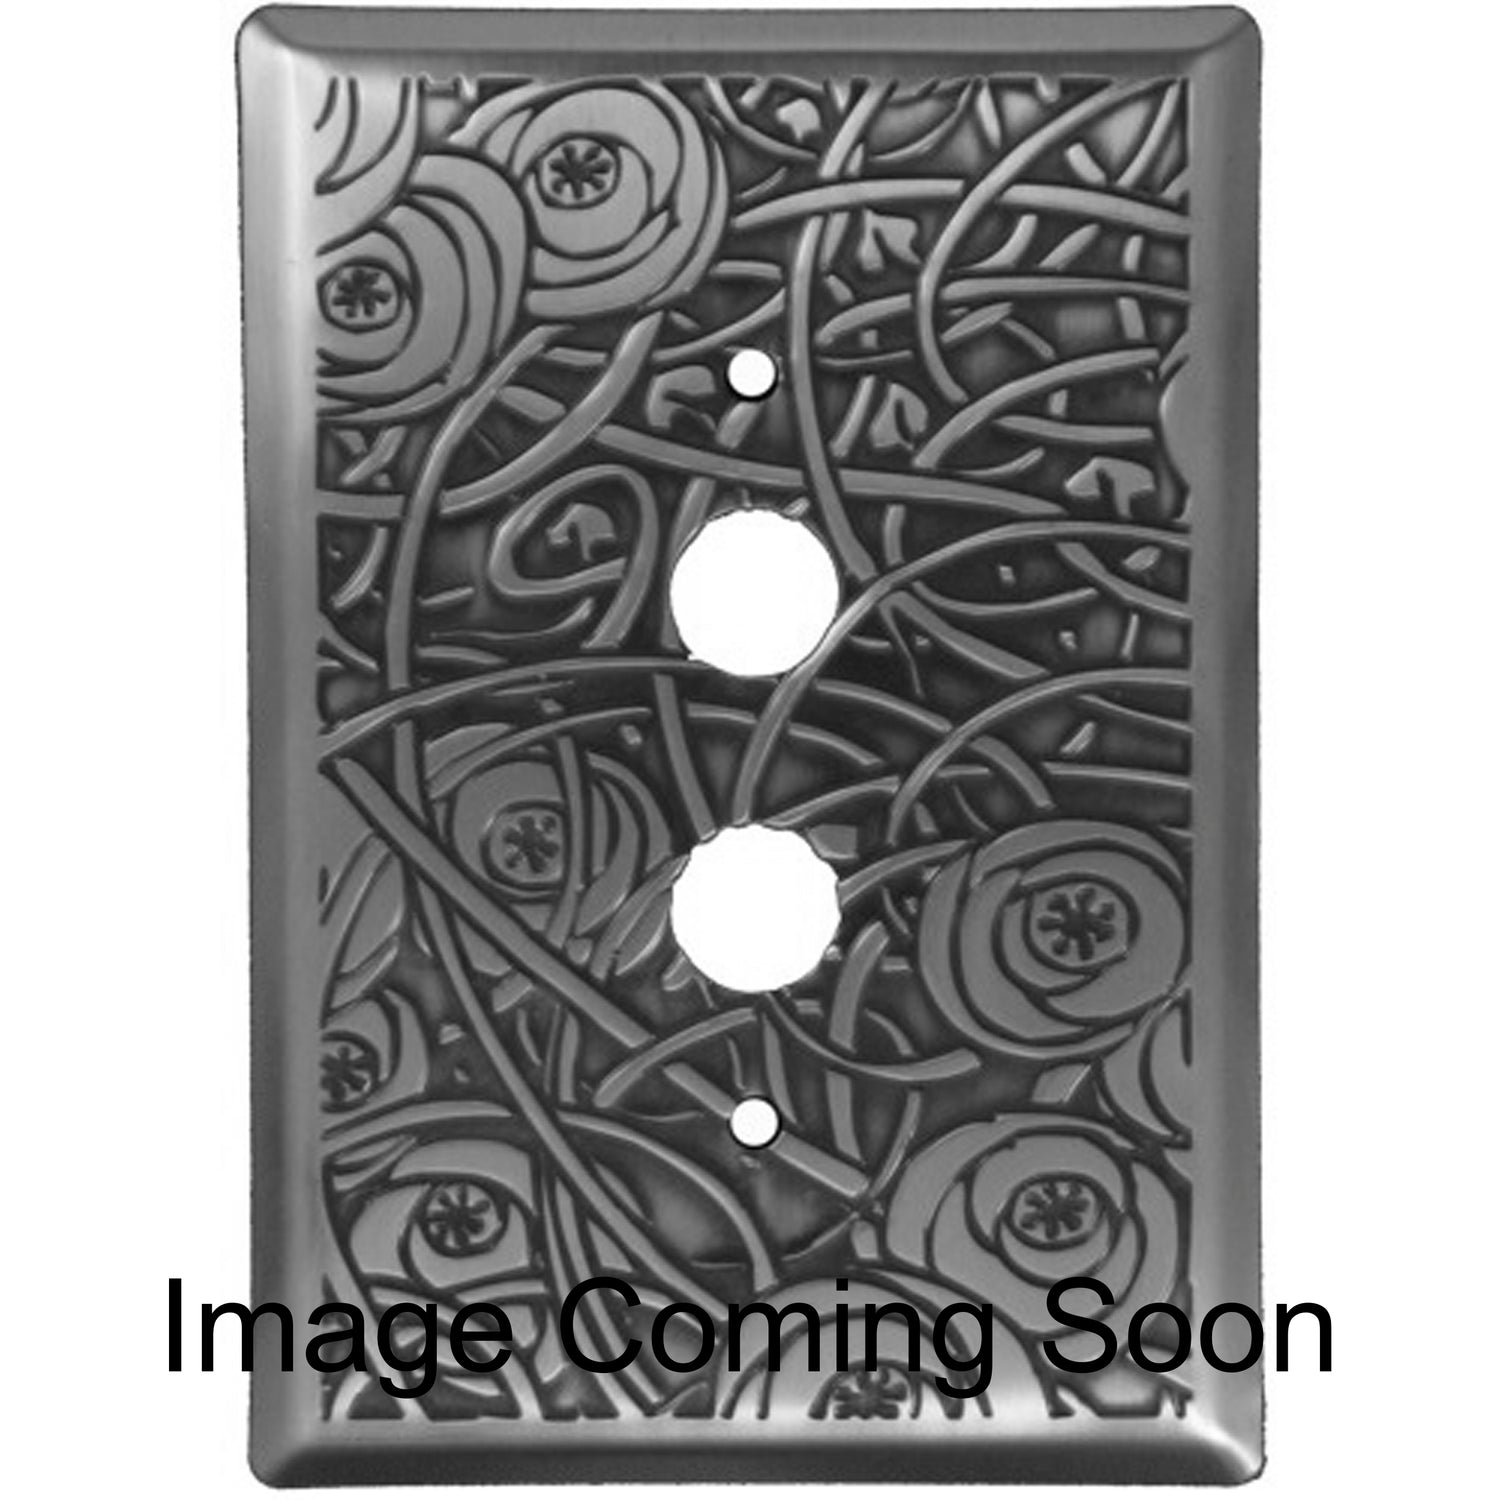 Deco Floral Oil Rubbed Copper 1 Pushbutton Switchplate:Wallplatesonline.com